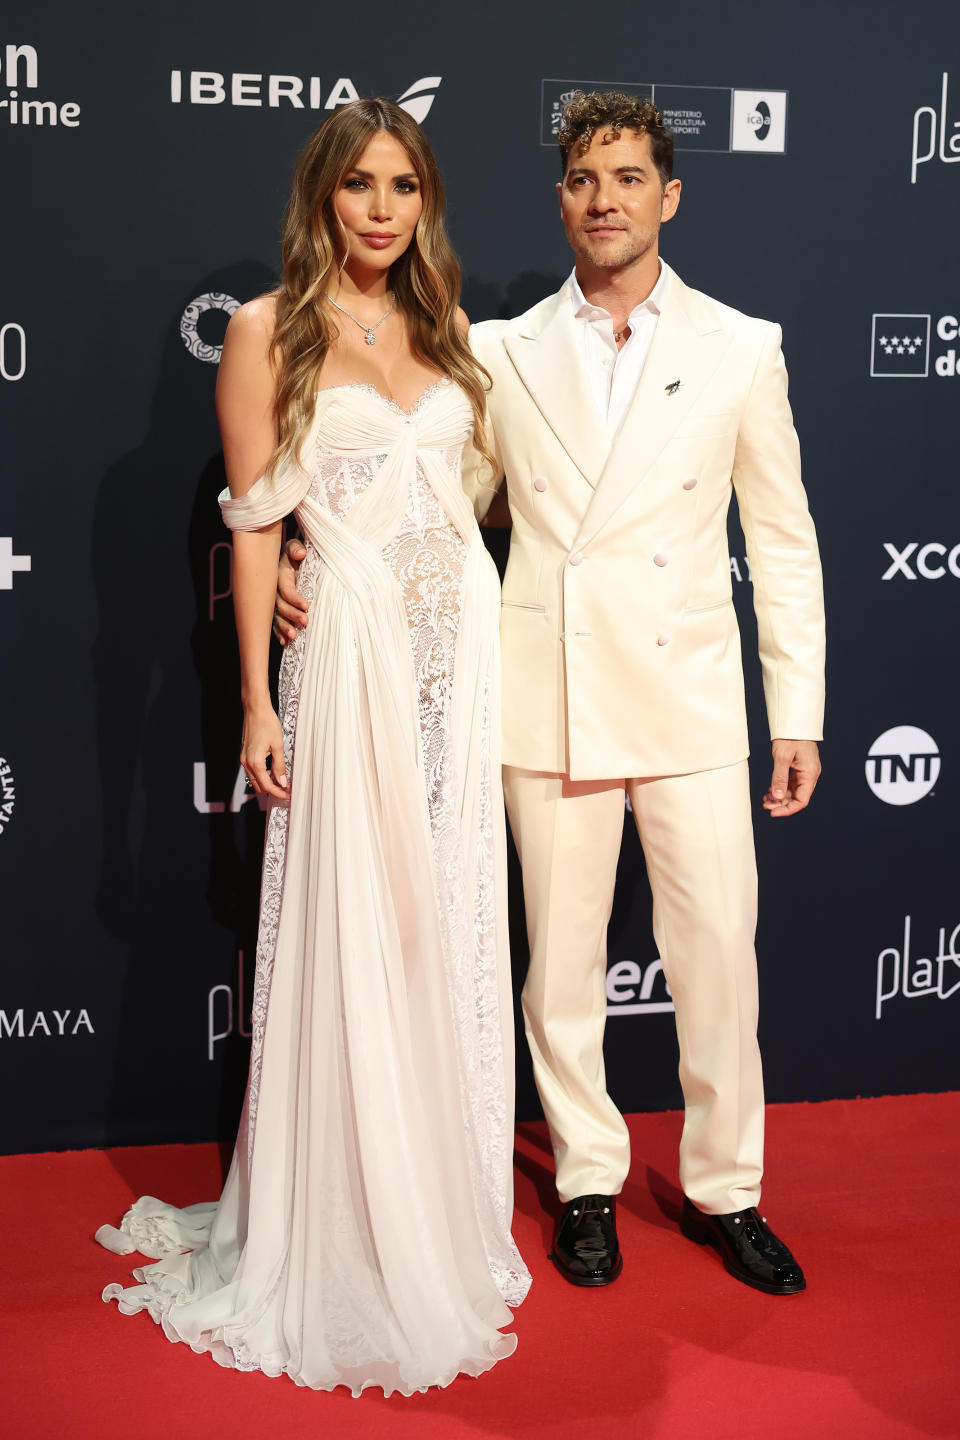 RIVIERA MAYA, MEXICO - APRIL 20: Rosanna Zanetti and David Bisbal pose during the red carpet for the 11th edition of Premios Platino at Xcaret on April 20, 2024 in Riviera Maya, Mexico.  (Photo by Hector Vivas/Getty Images)